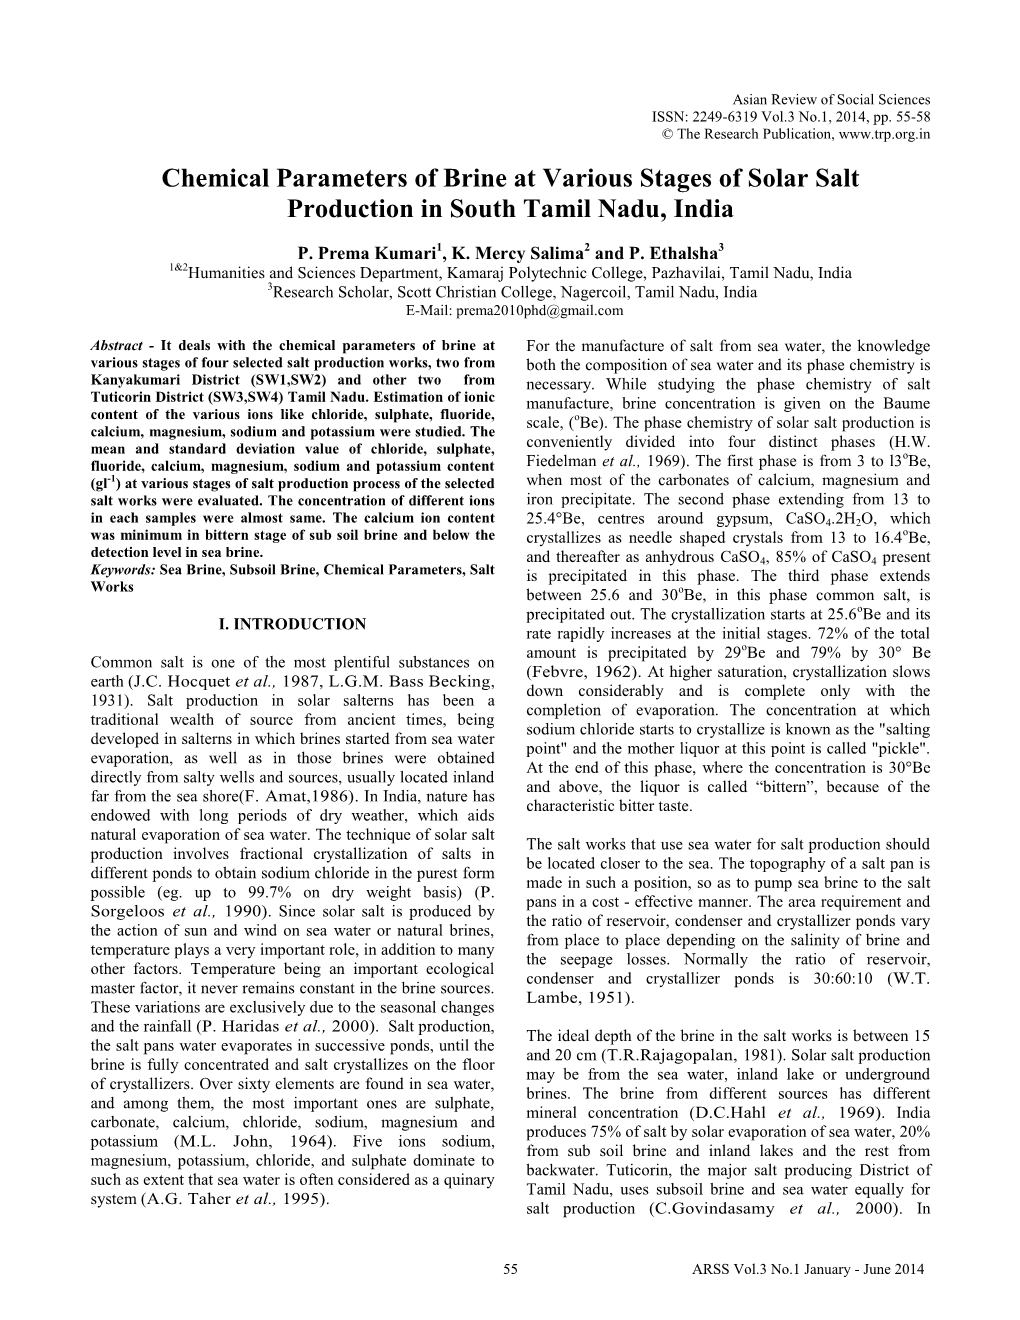 Chemical Parameters of Brine at Various Stages of Solar Salt Production in South Tamil Nadu, India